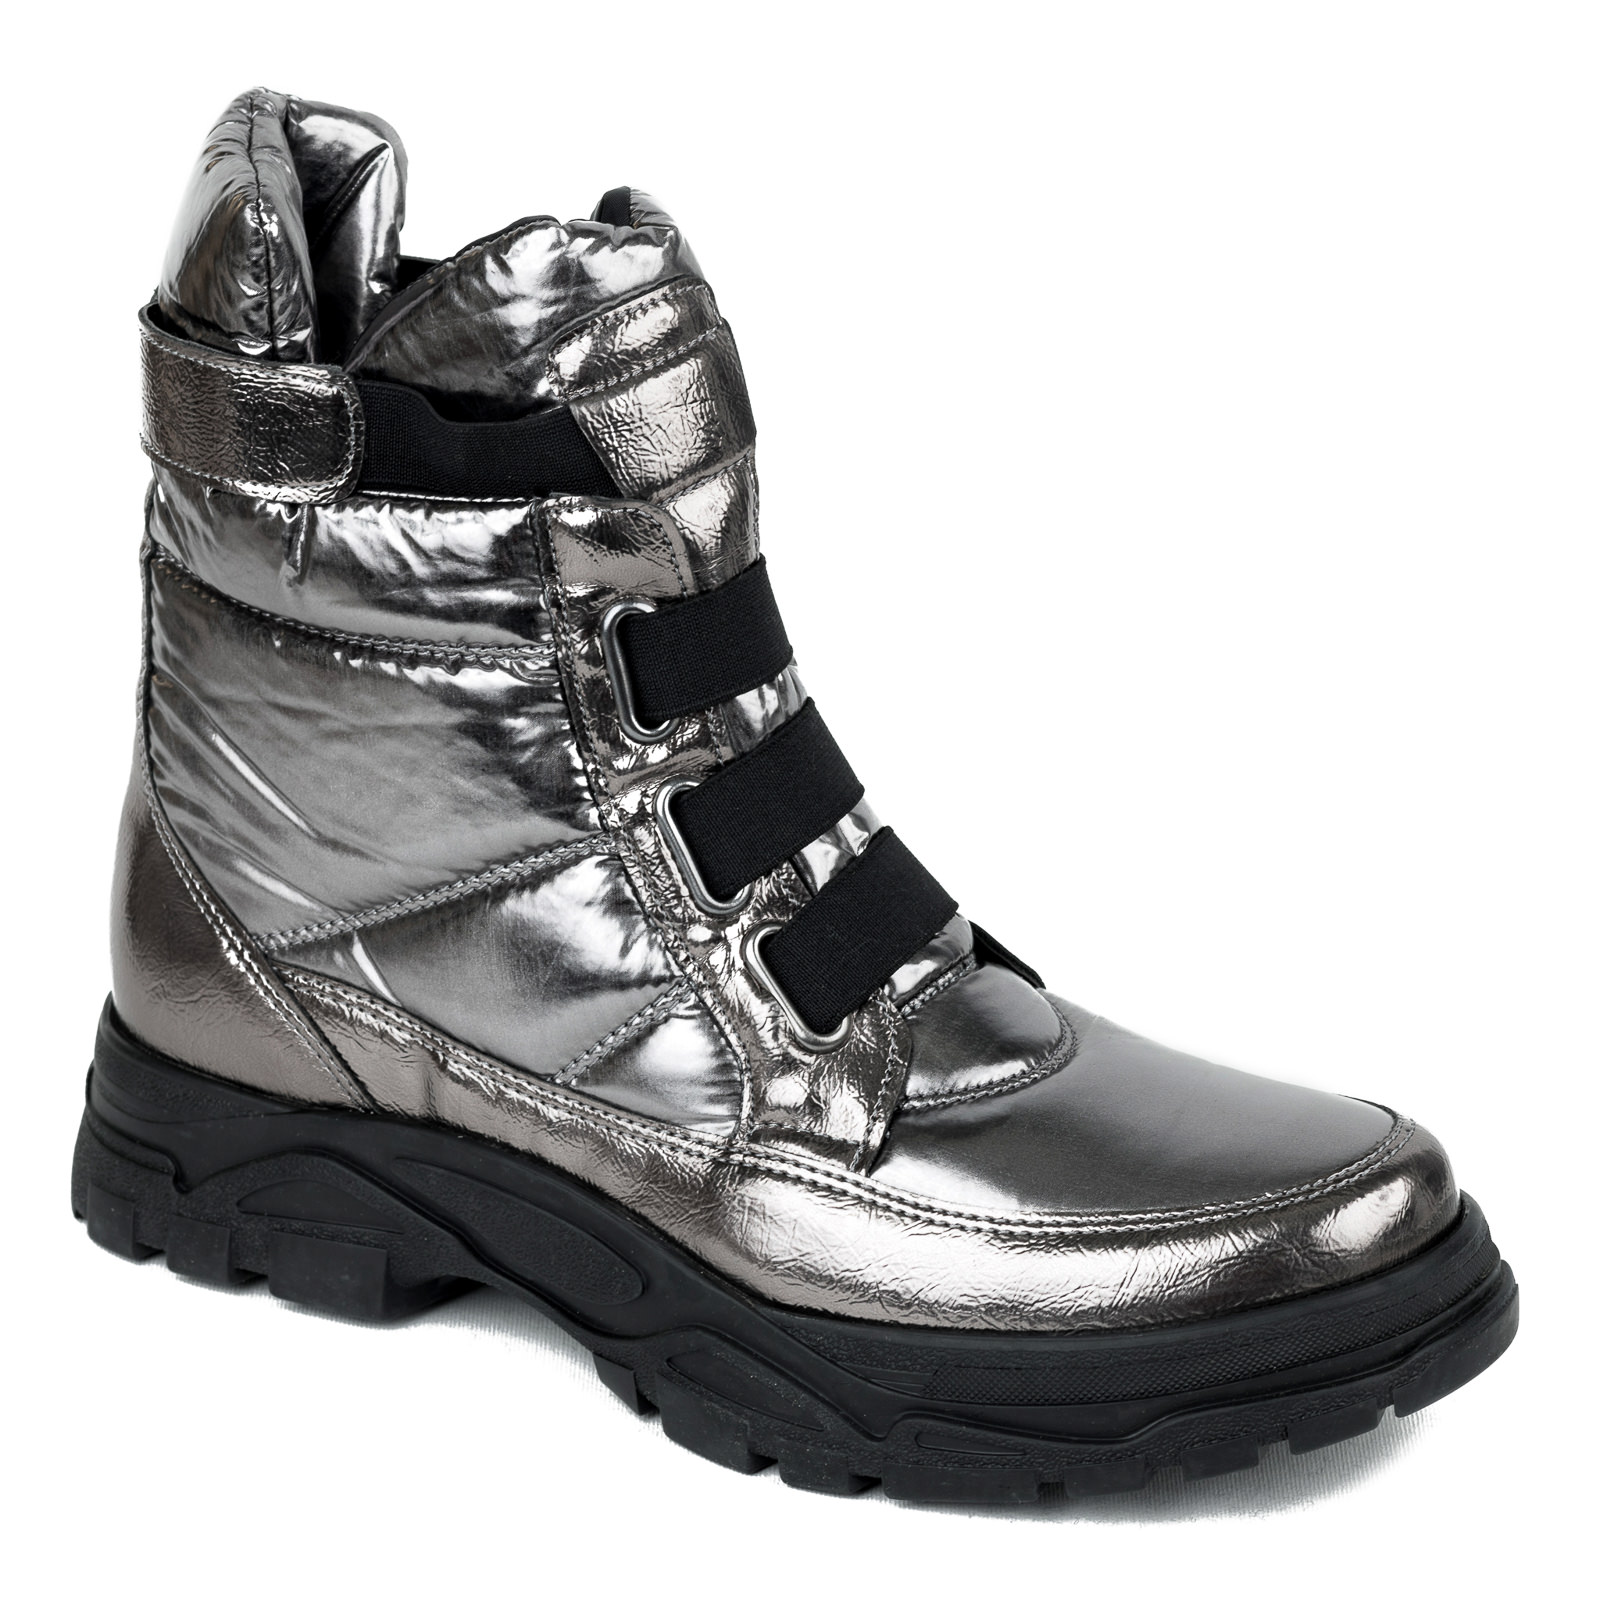 Women ankle boots B646 - SILVER